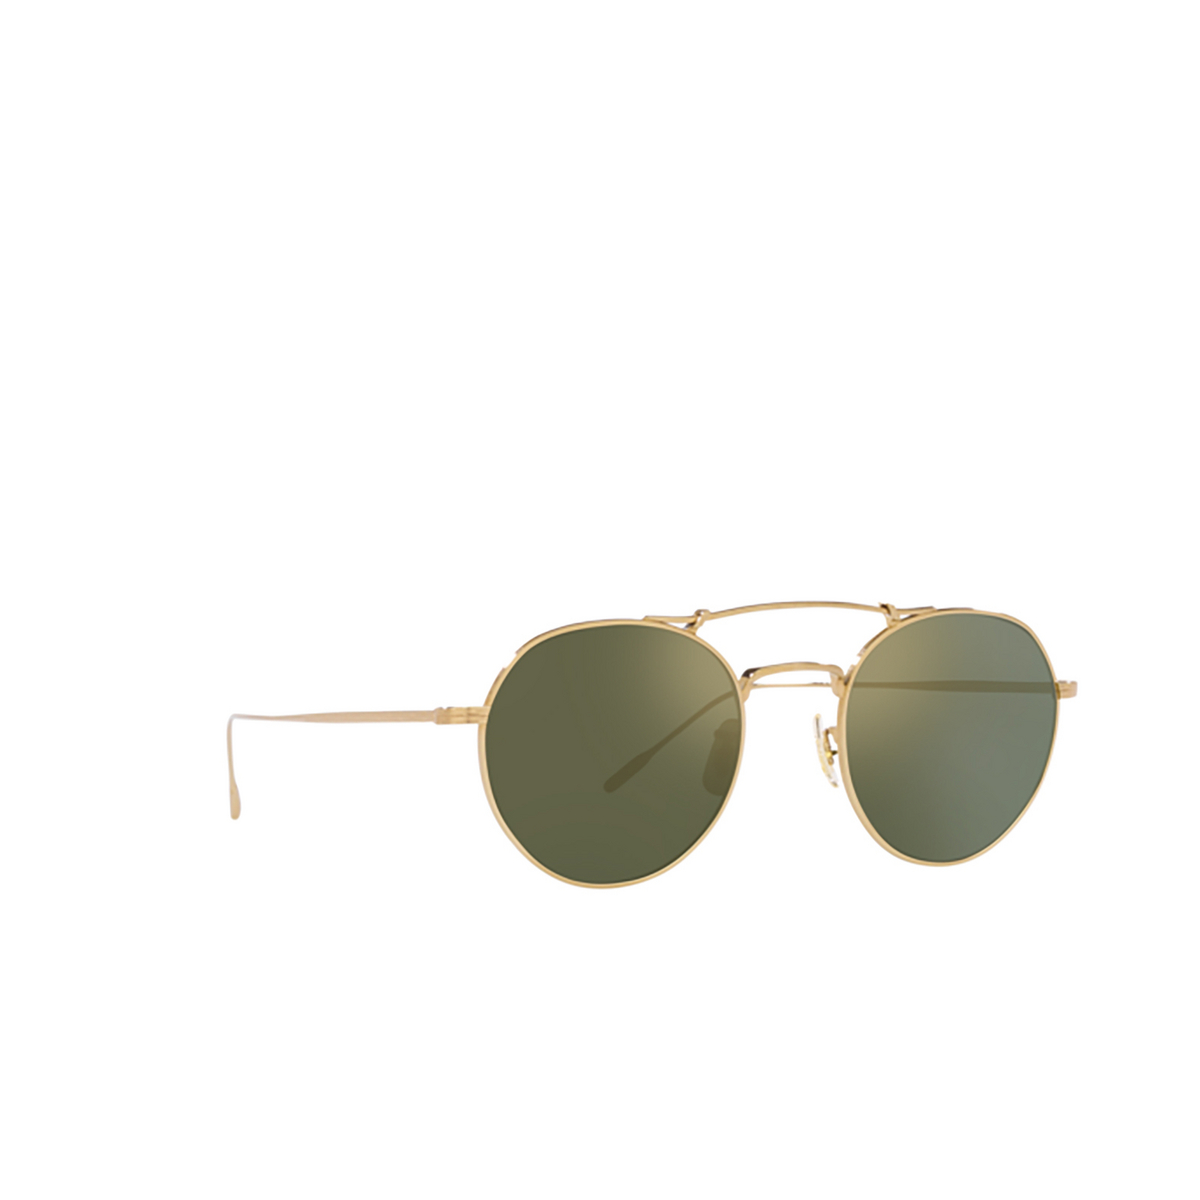 Oliver Peoples REYMONT Sunglasses 5292O8 Gold - three-quarters view